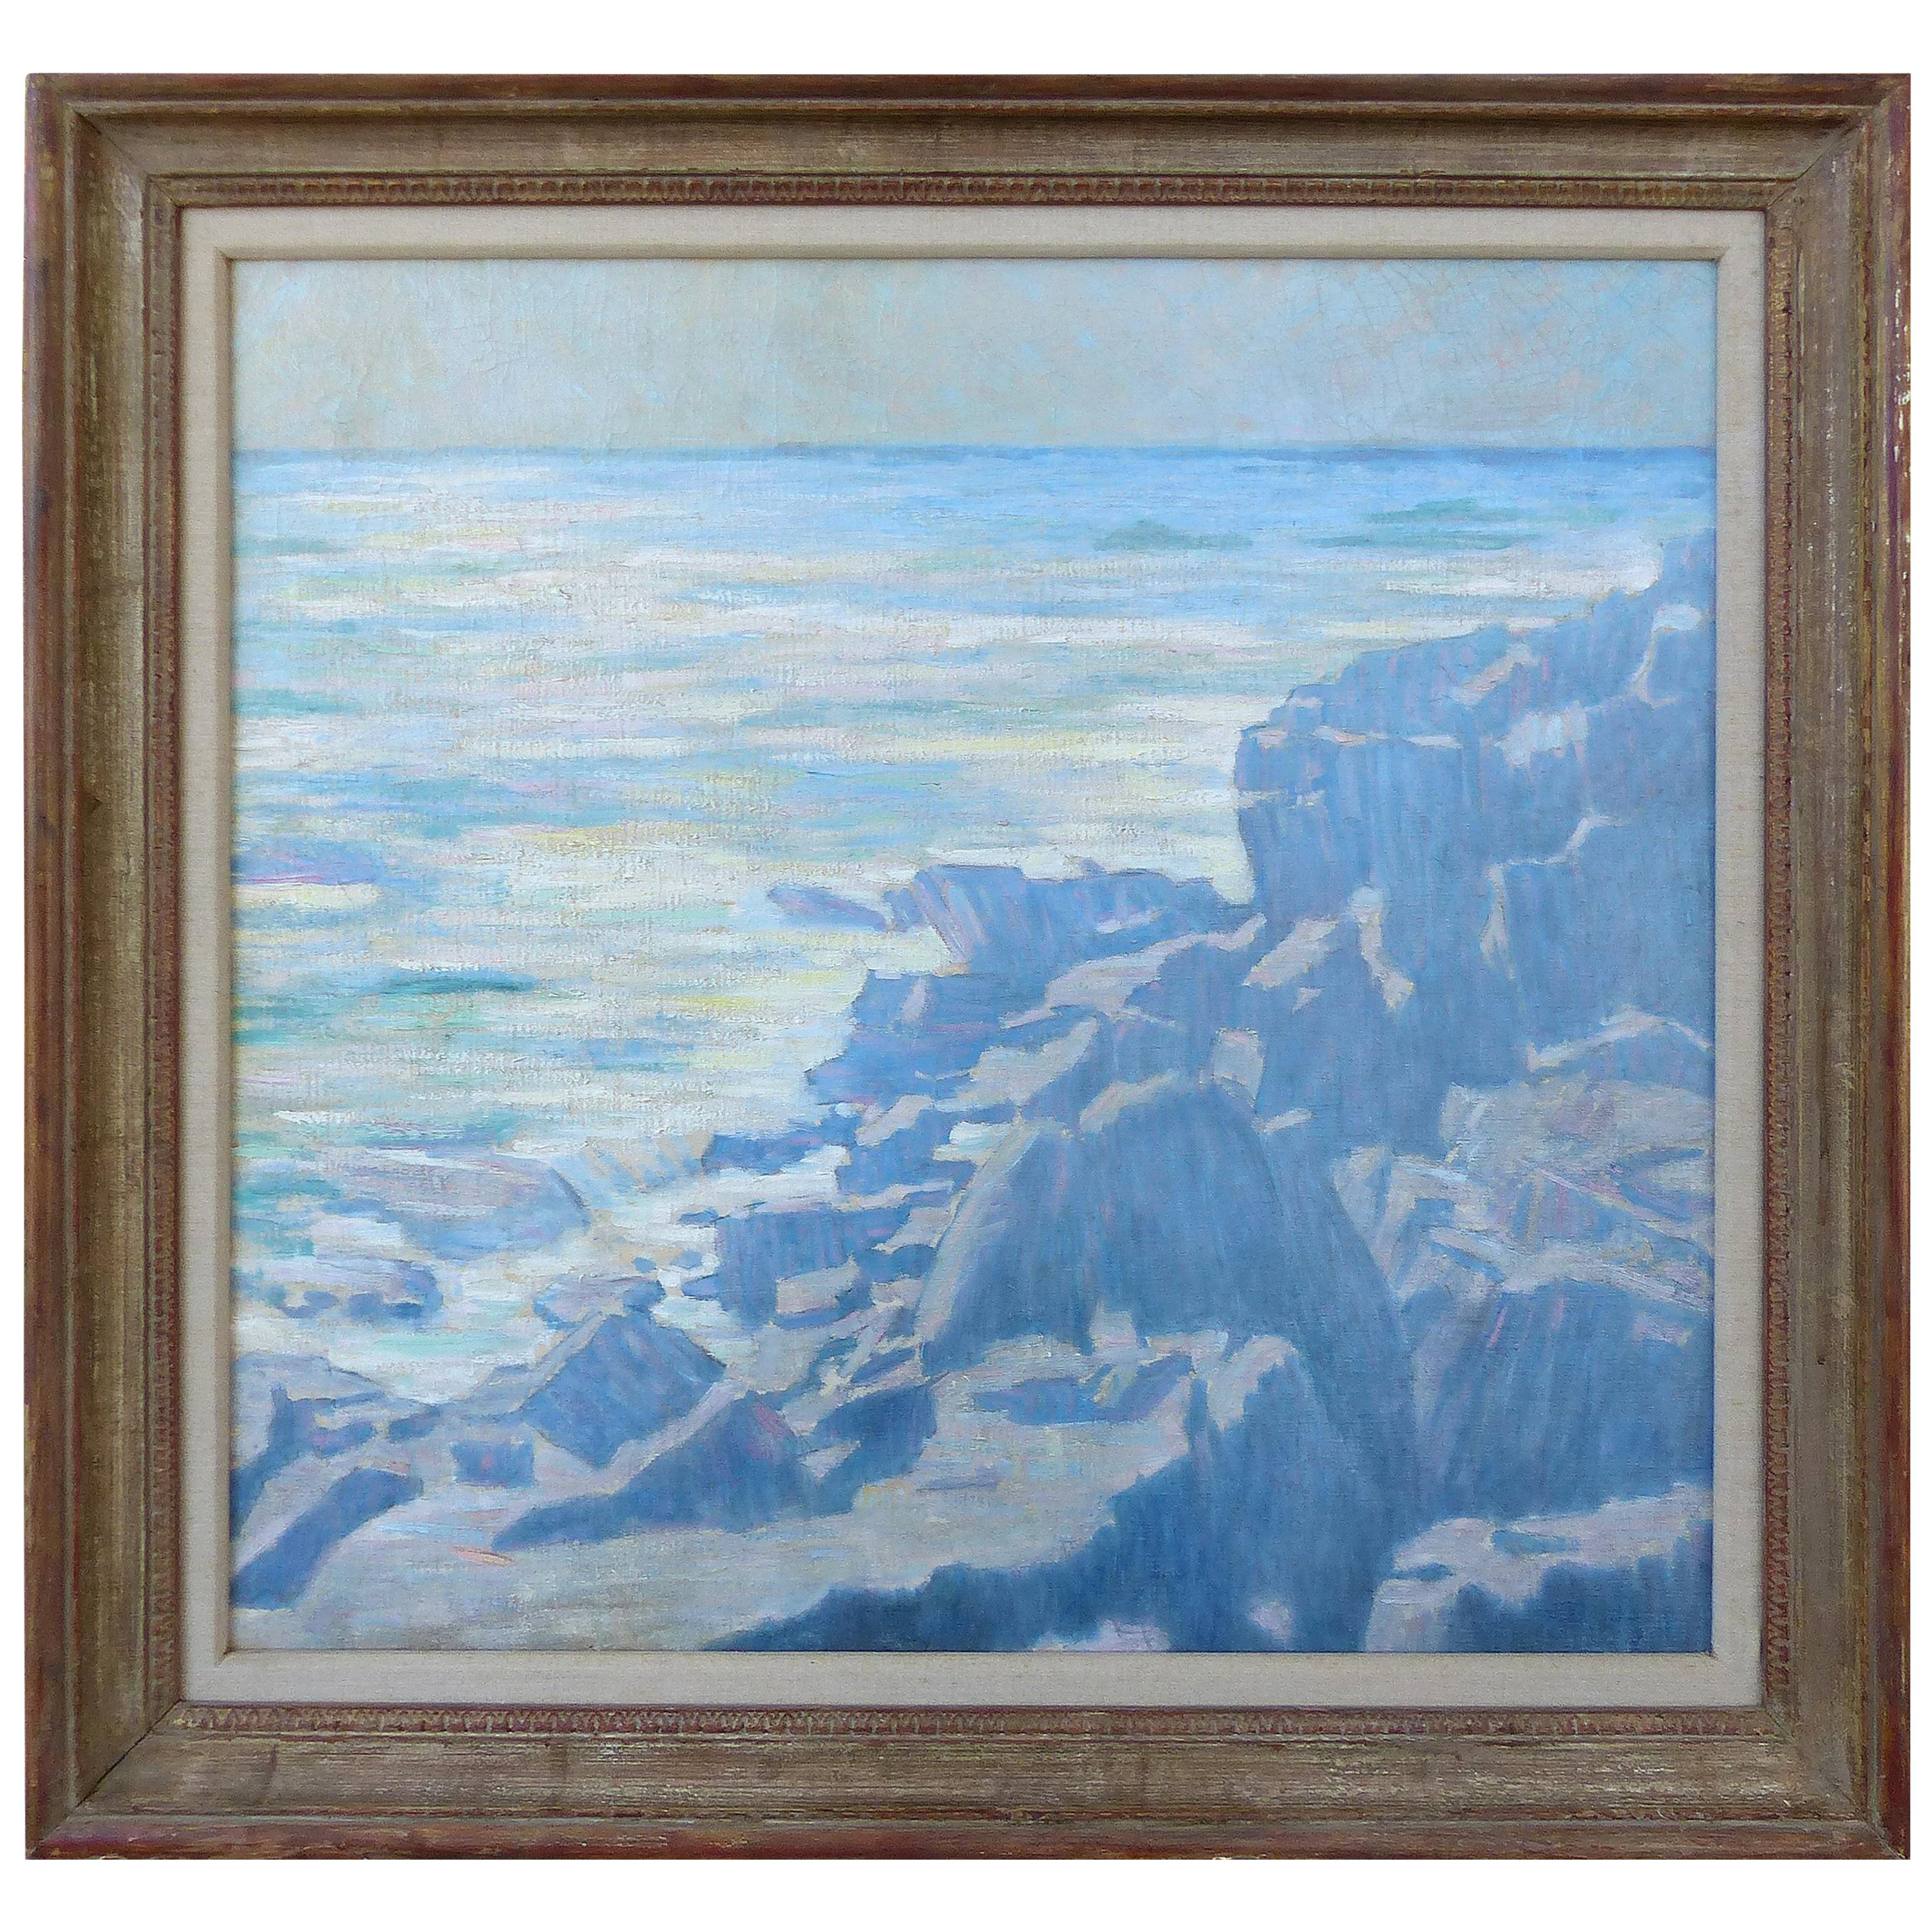 Seascape, a View from Montauk NY by Albert Delmont Smith, 1886-1962